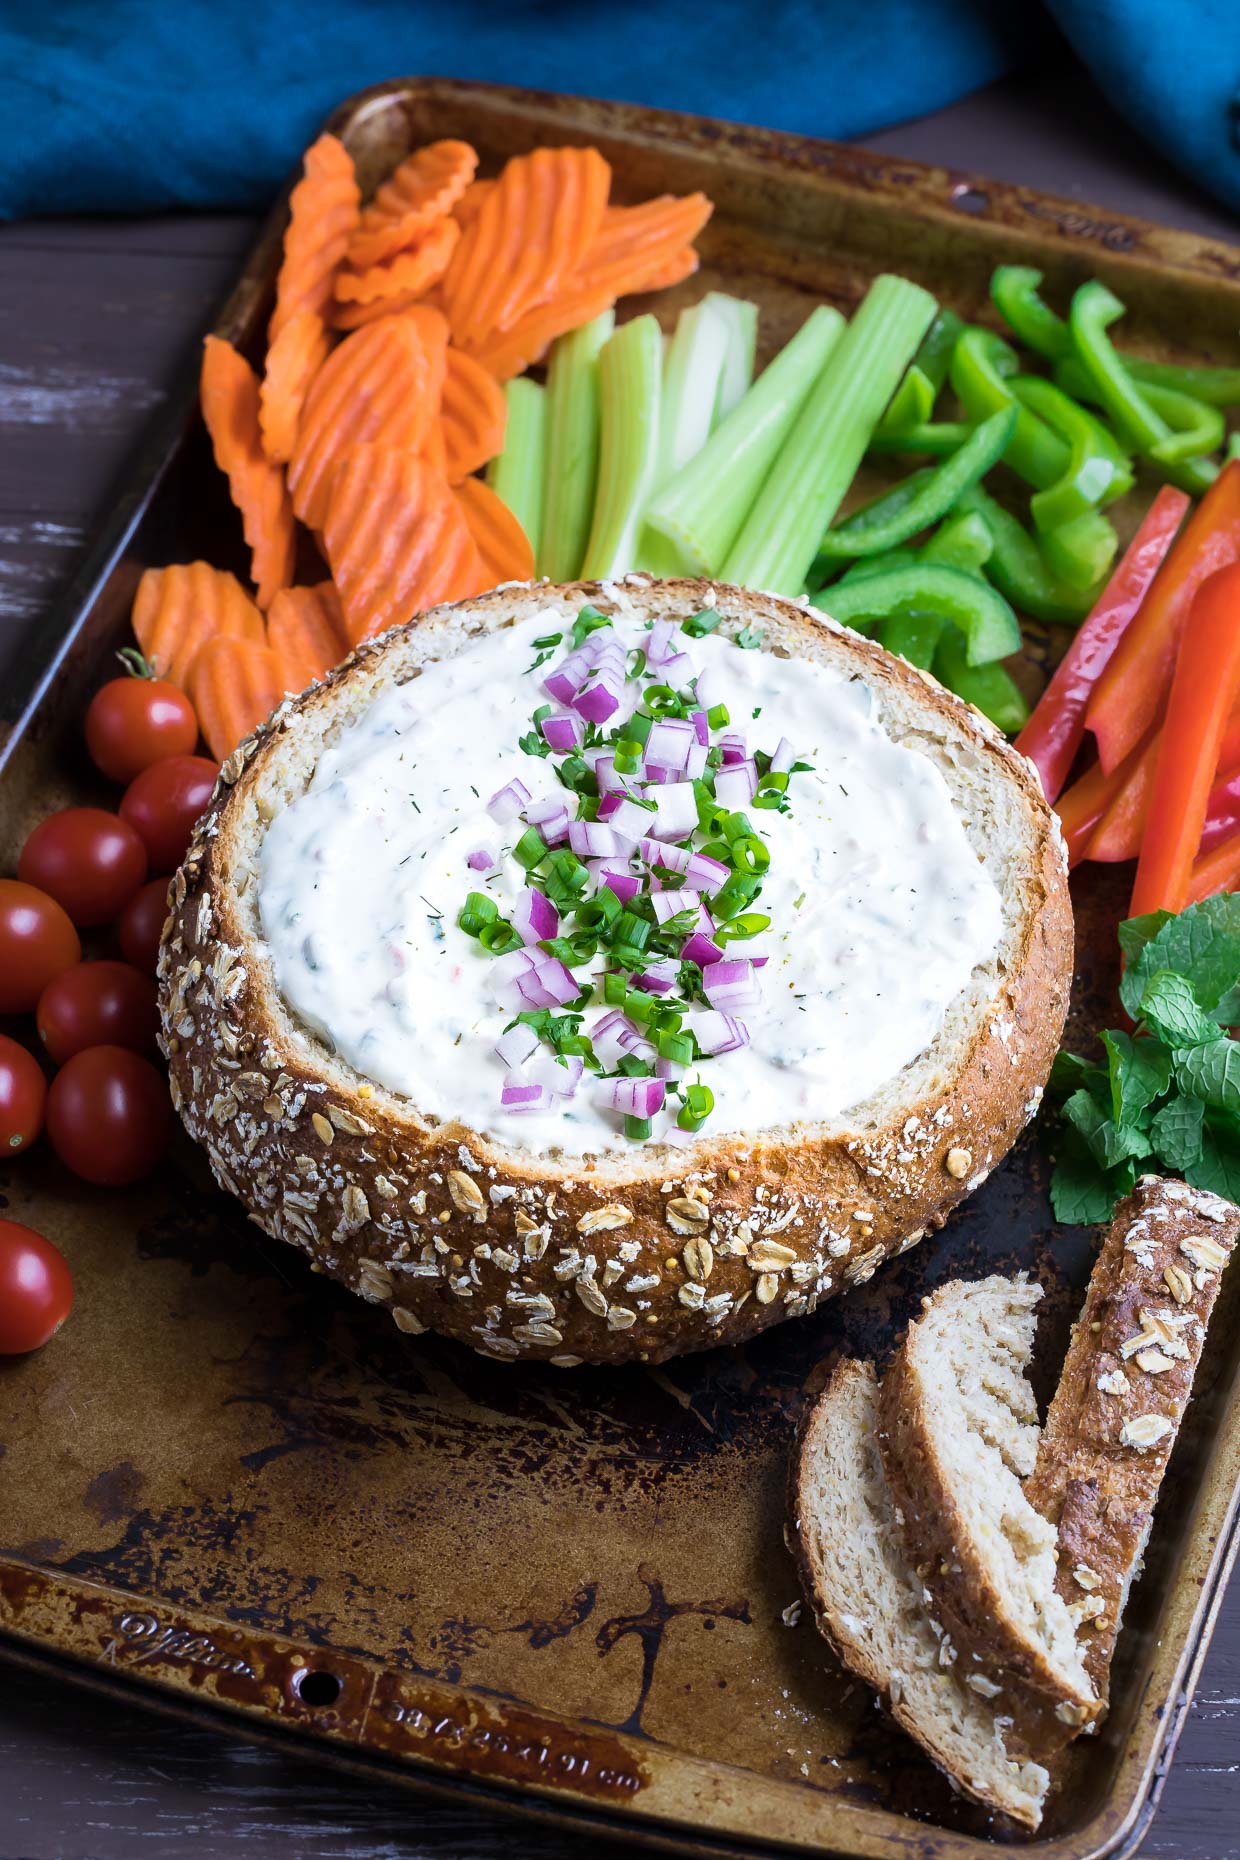 This party-perfect Chilled Veggie Dip is served in a bread bowl with crunchy veggies for a tasty snack that will have your guests coming back for more!